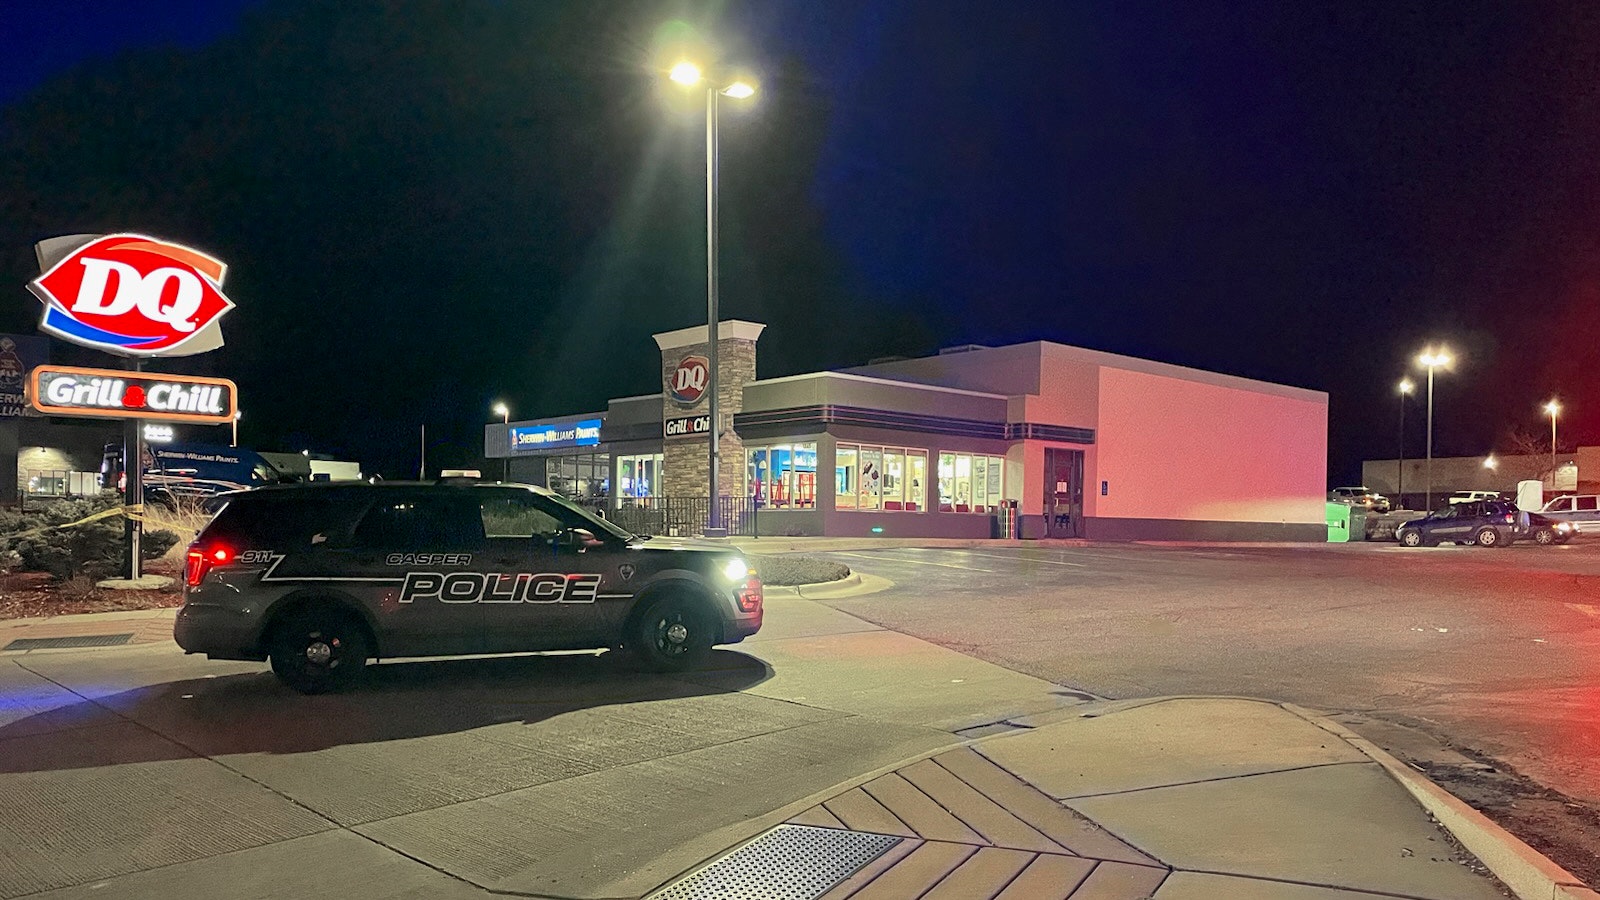 Casper Police Department were called to a shooting at an east-side Dairy Queen on Sunday night. Investigation revealed the accidental discharge of a weapon sent an 18-year-old to the hospital with a gunshot wound.